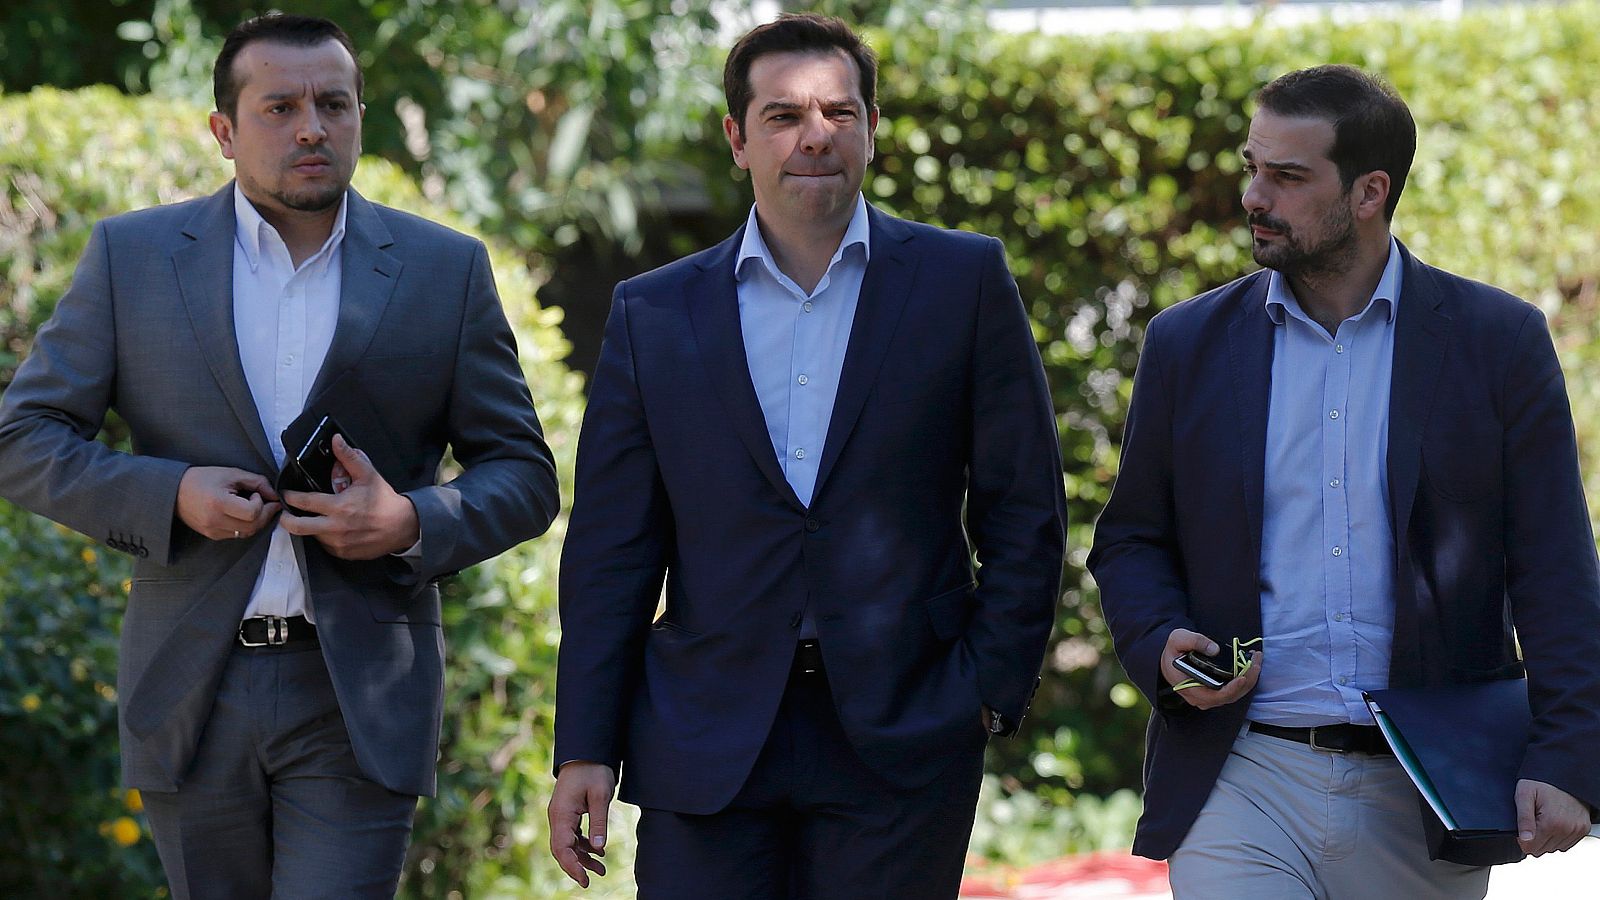 Greek Prime Minister Tsipras, Minister of State Papas and Government spokesman Sakelaridis leave the Presidential Palace for Maximos Mansion after a meeting with party leaders in central Athens